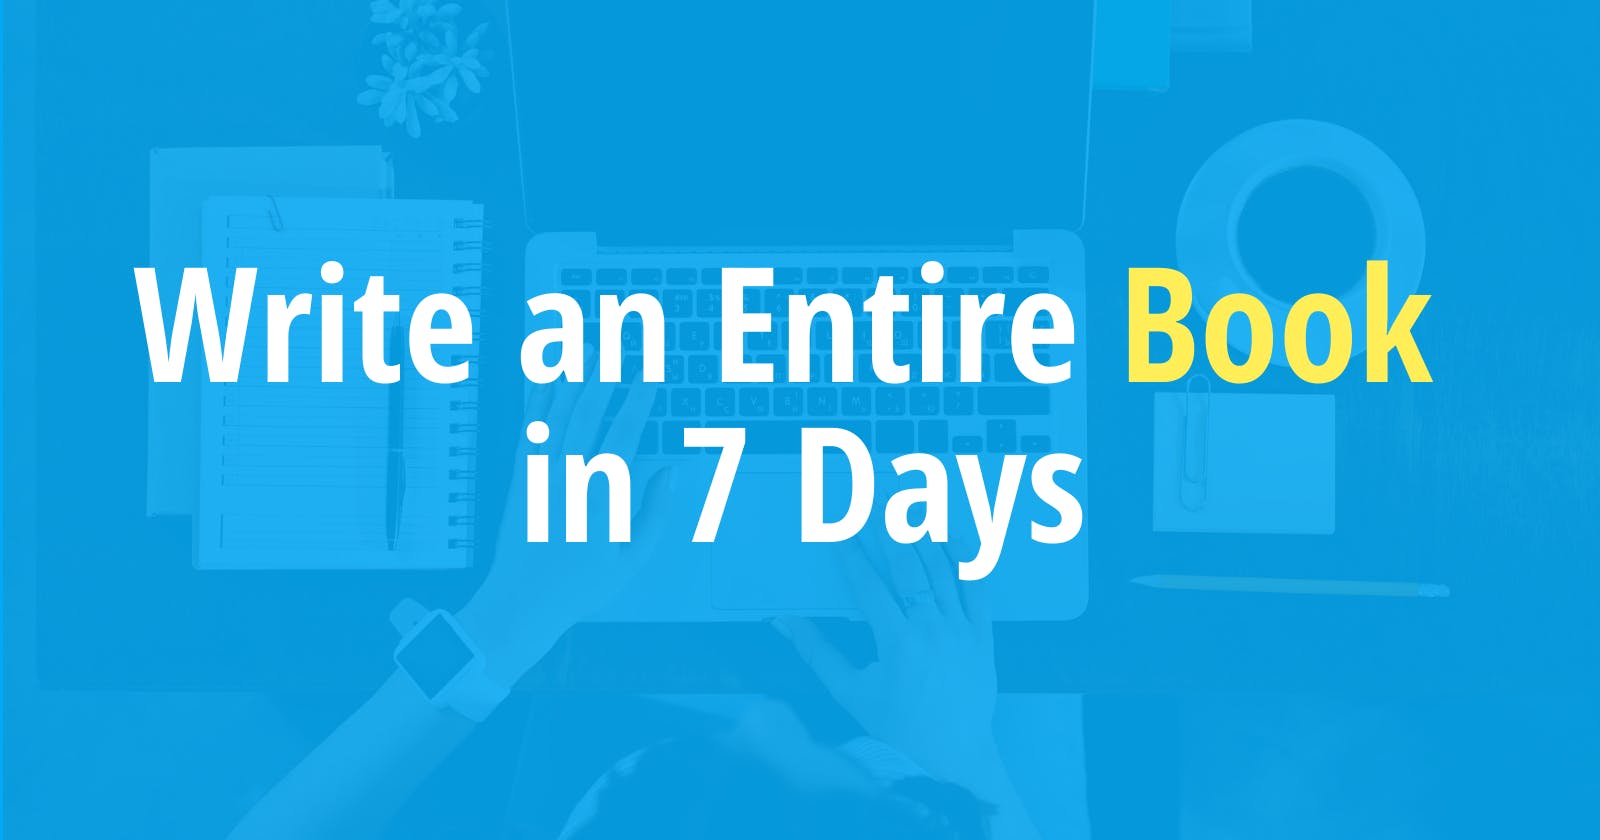 How to Write an Entire Book in 7 Days Using AI